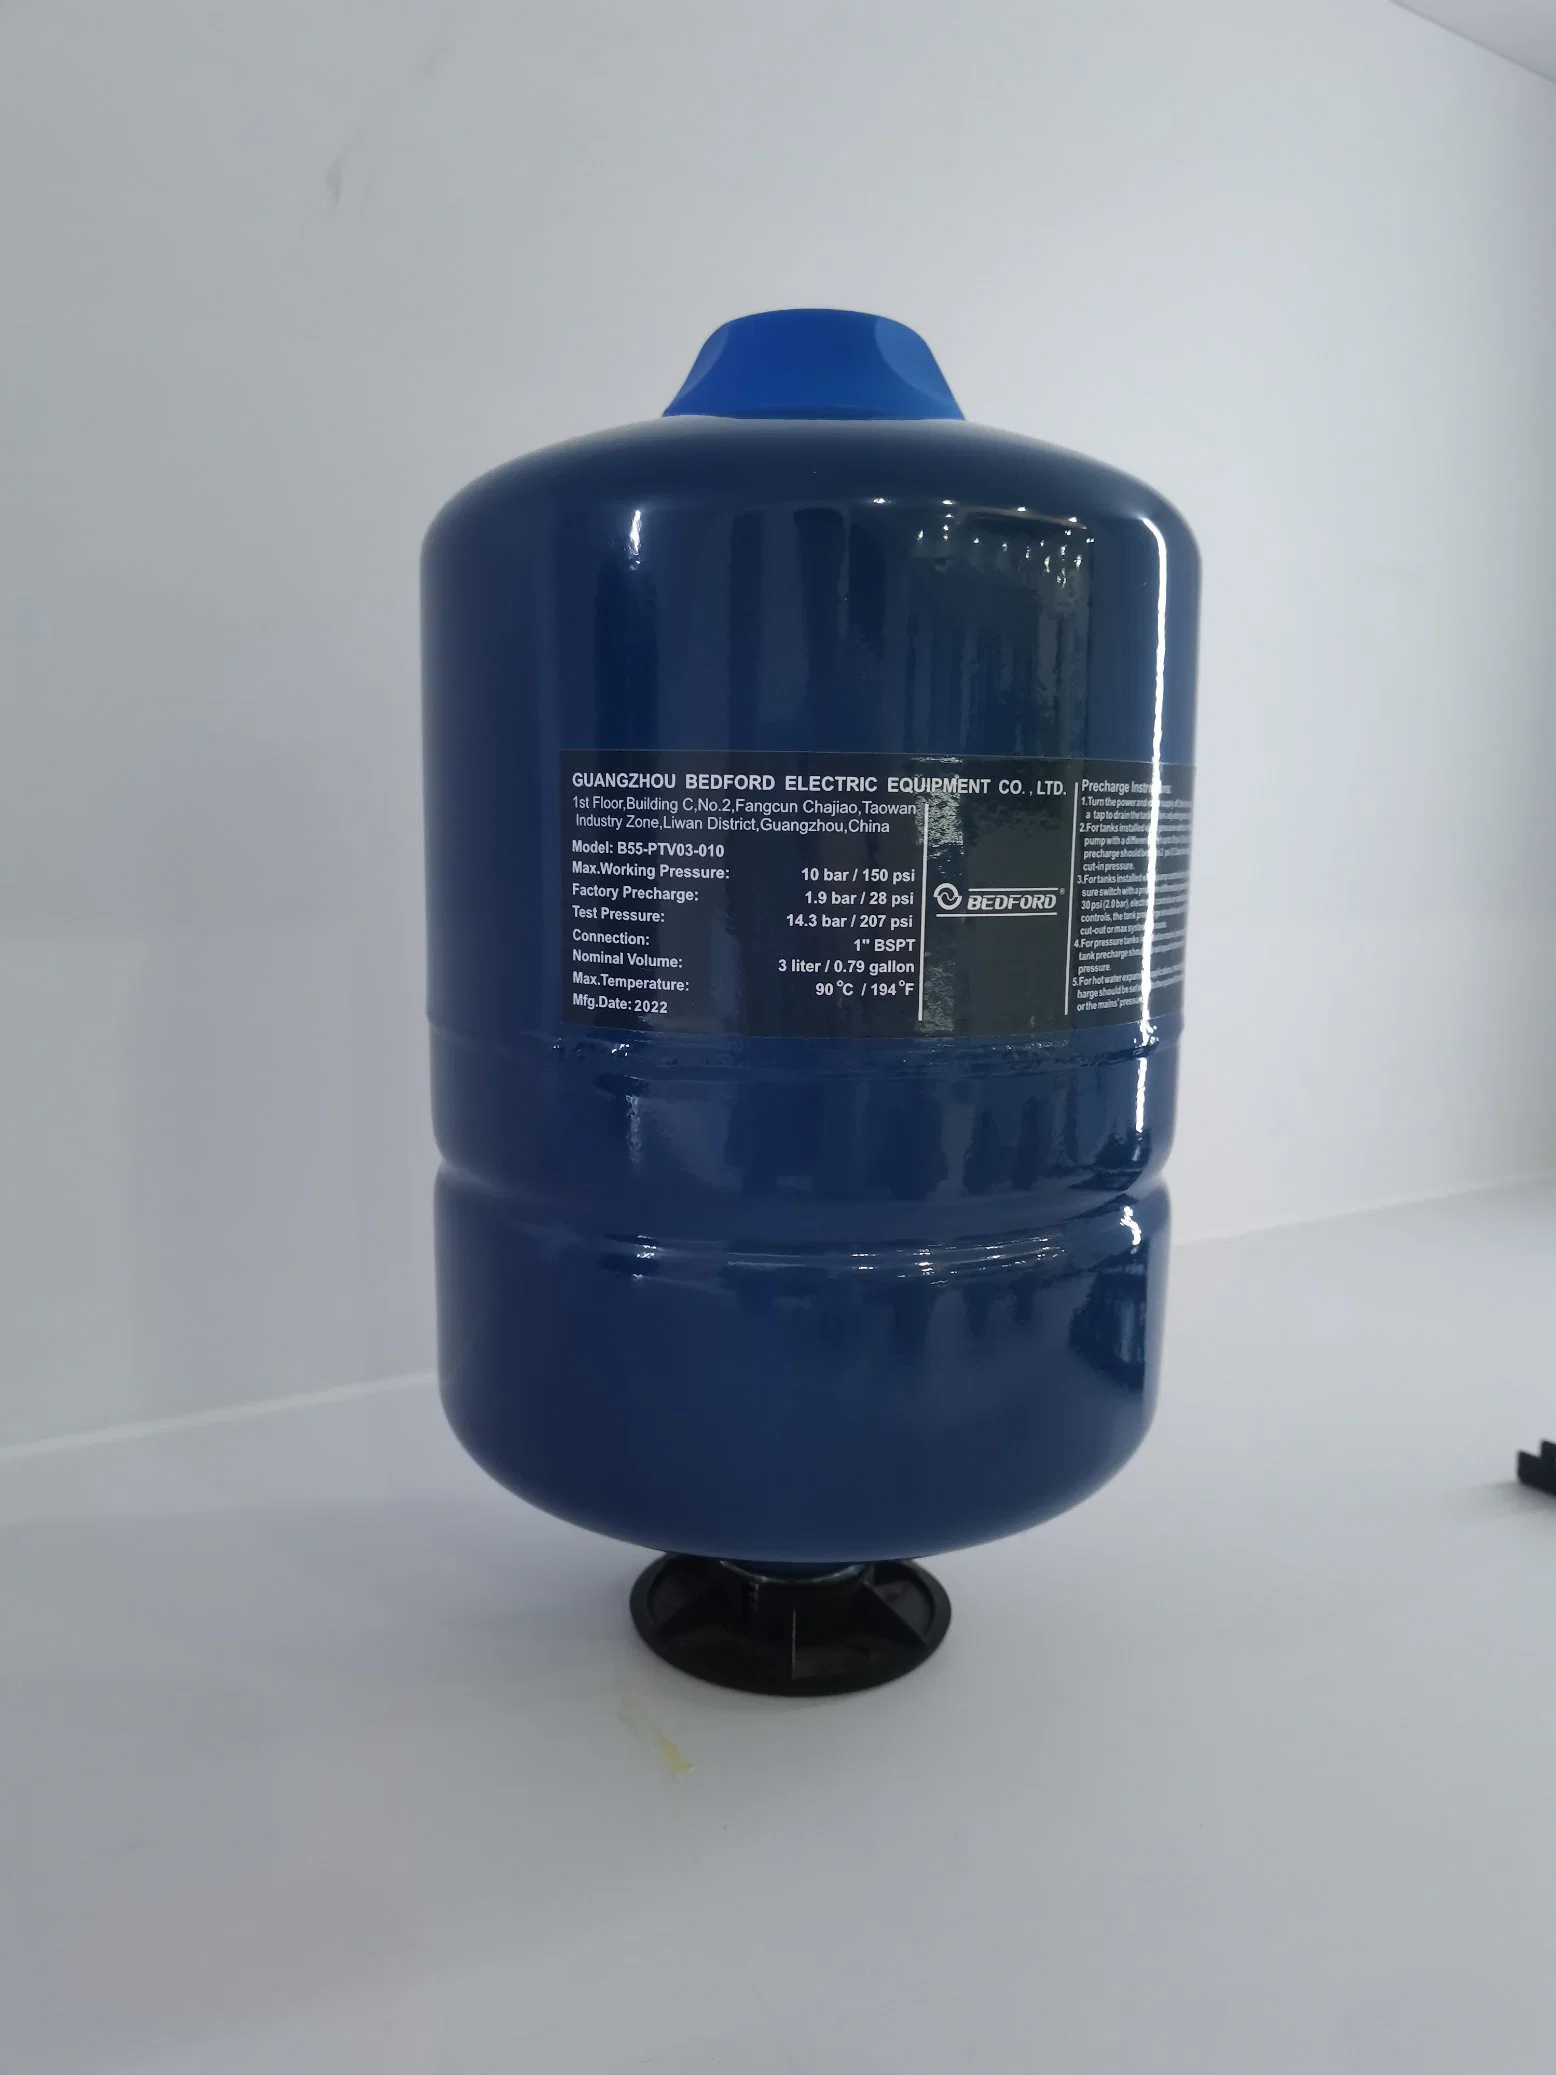 5L Pressure Tank for Water Supply Application